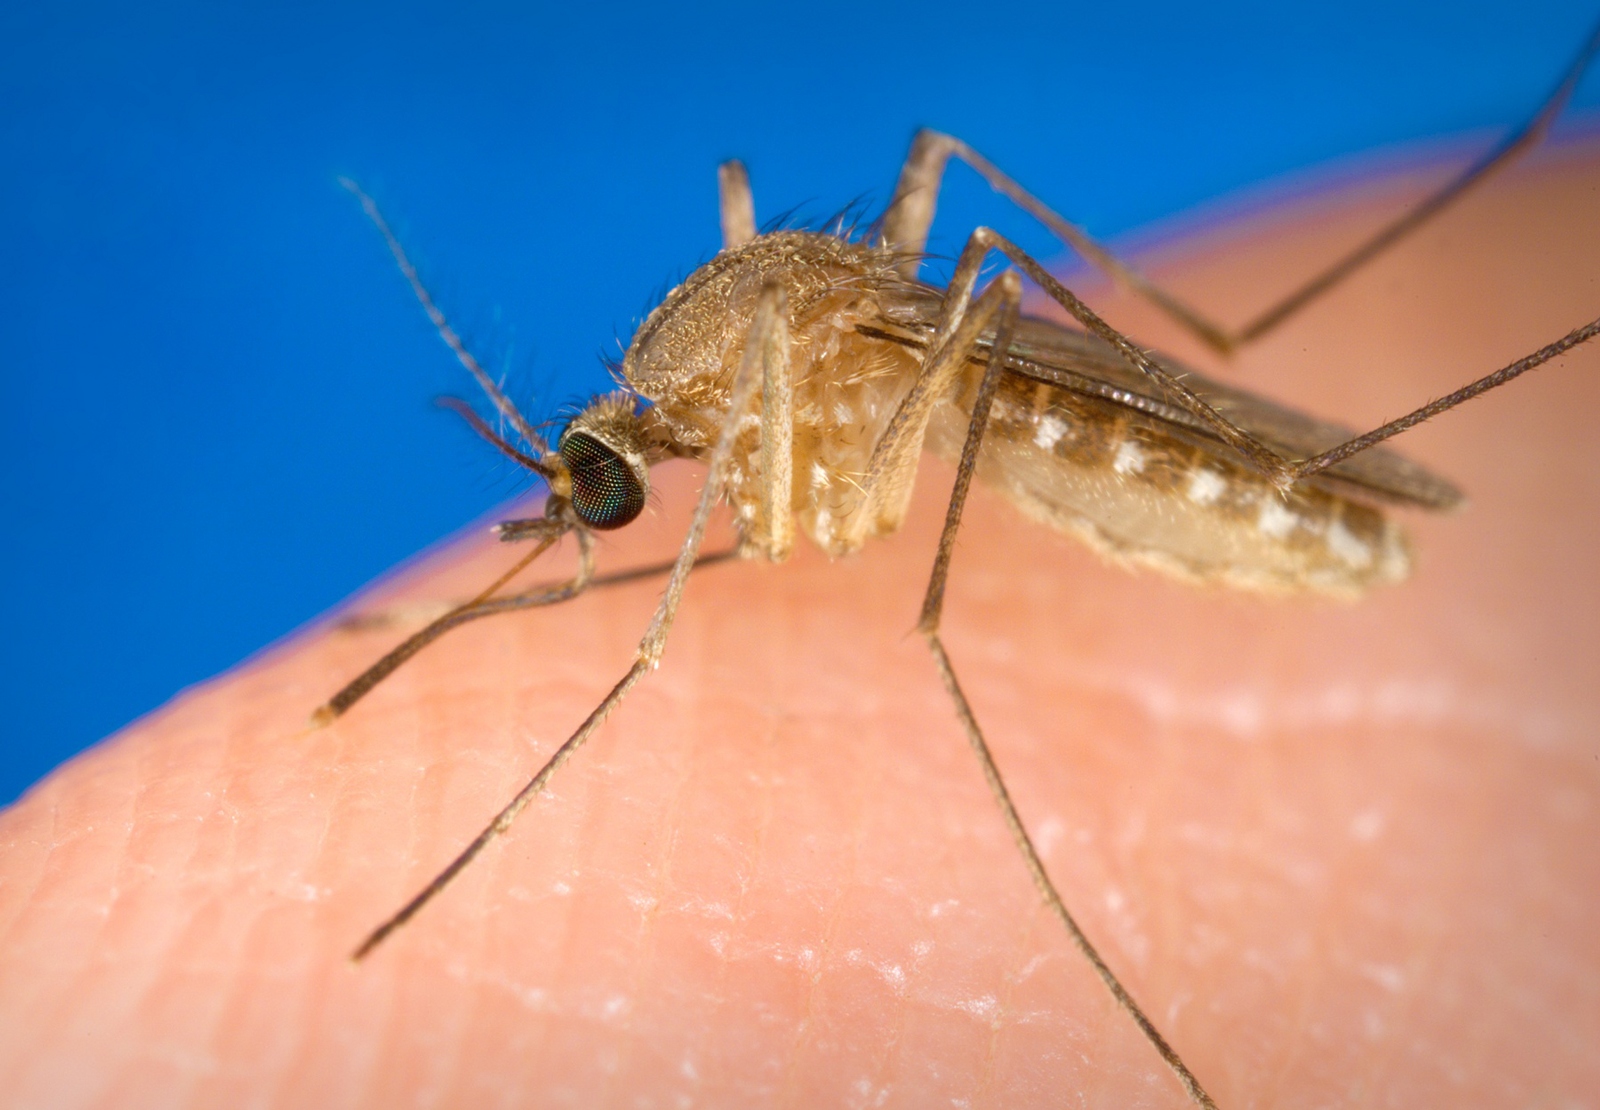 A close-up of a mosquito on a human fingertip